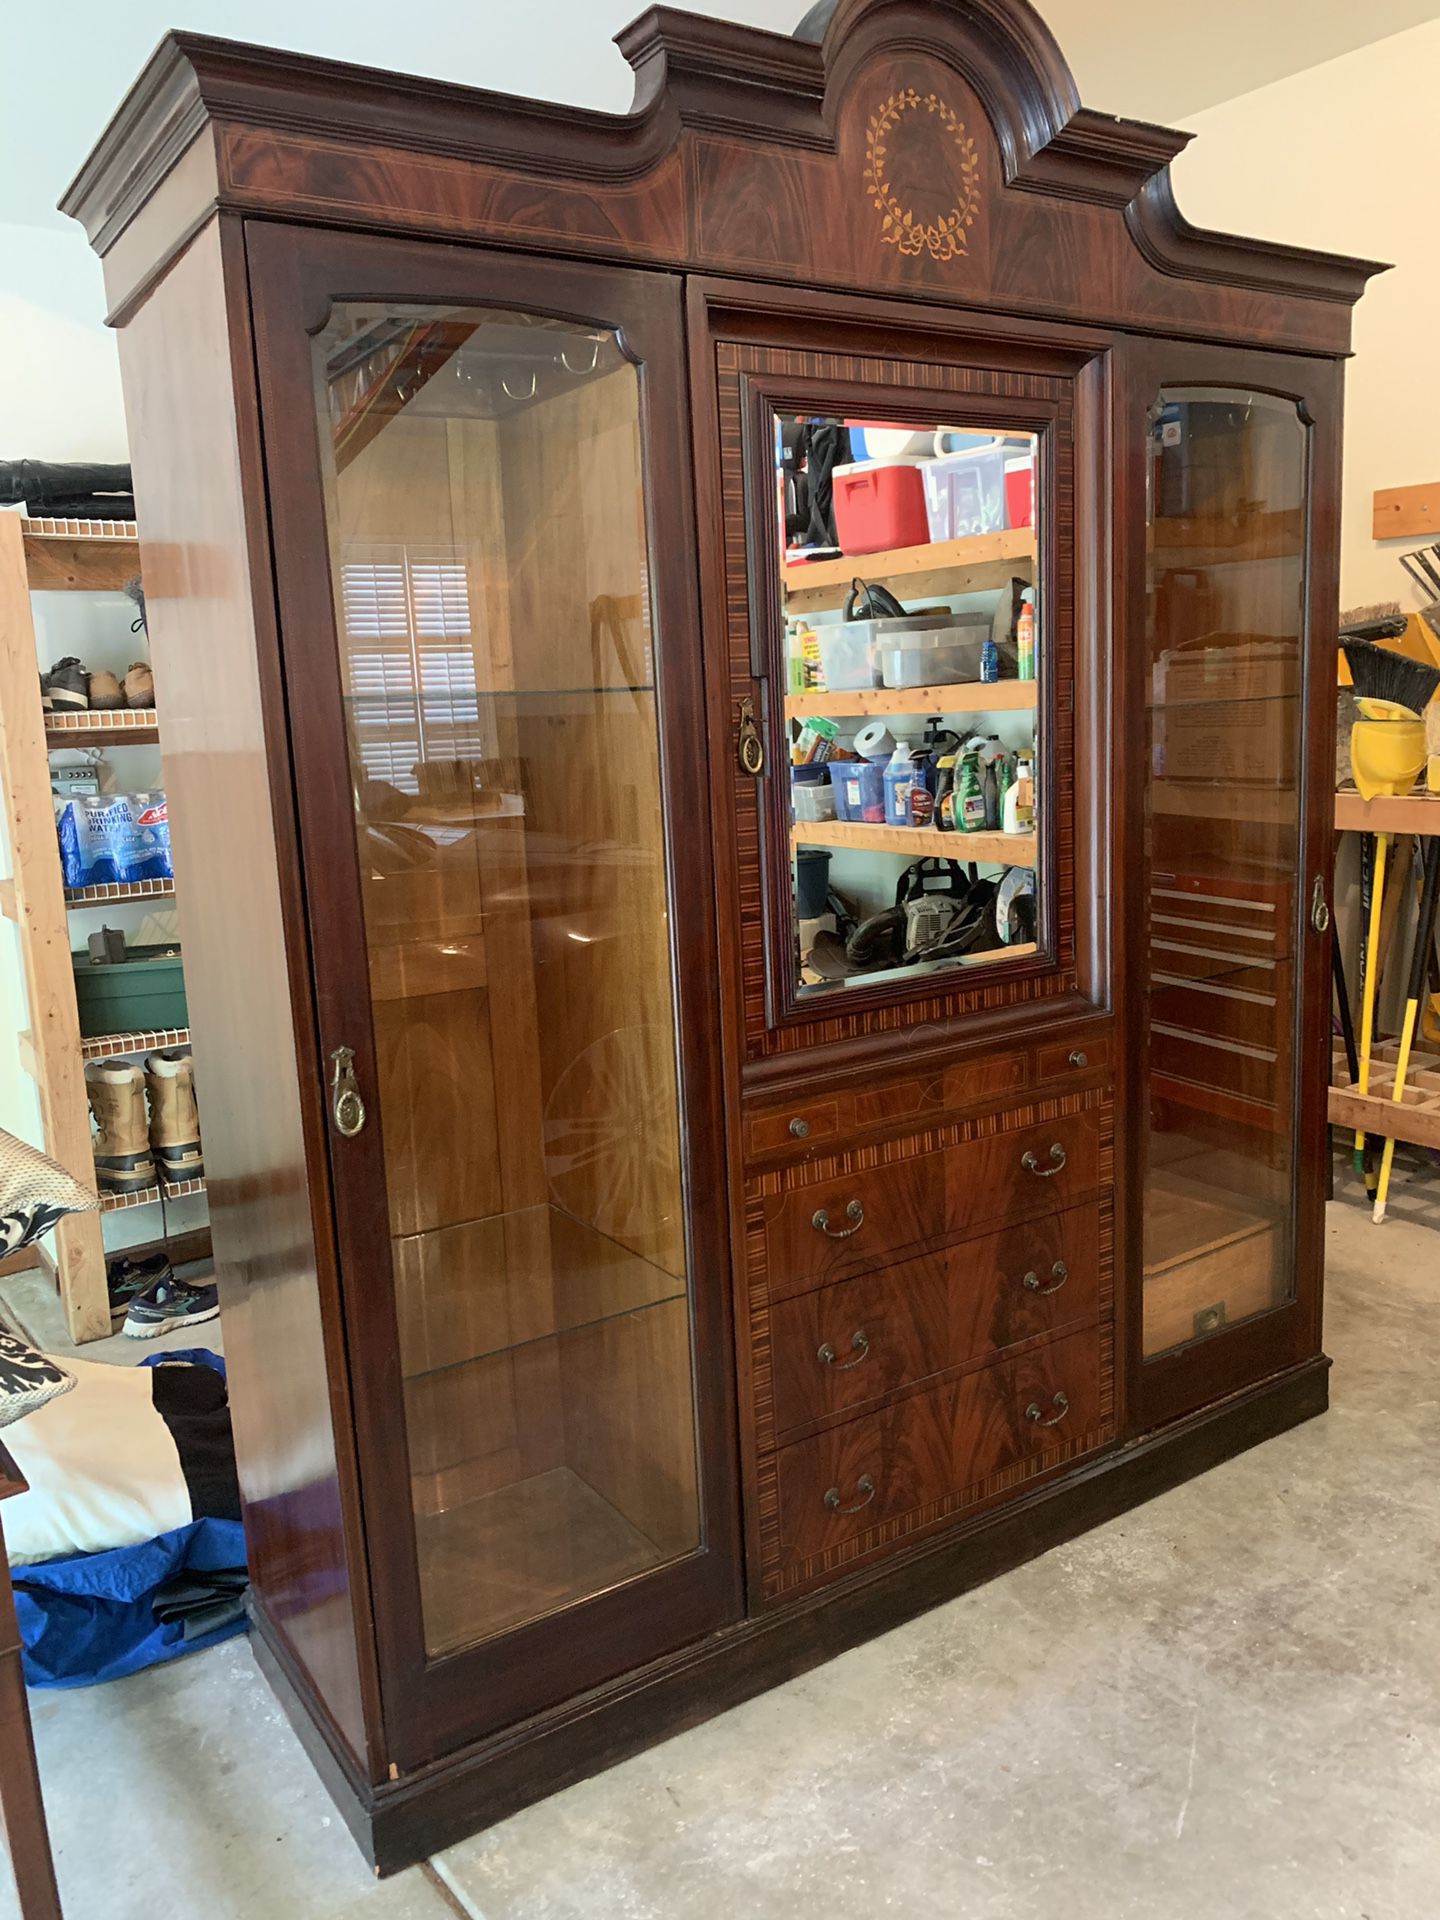 Antique display cabinet with lighting I